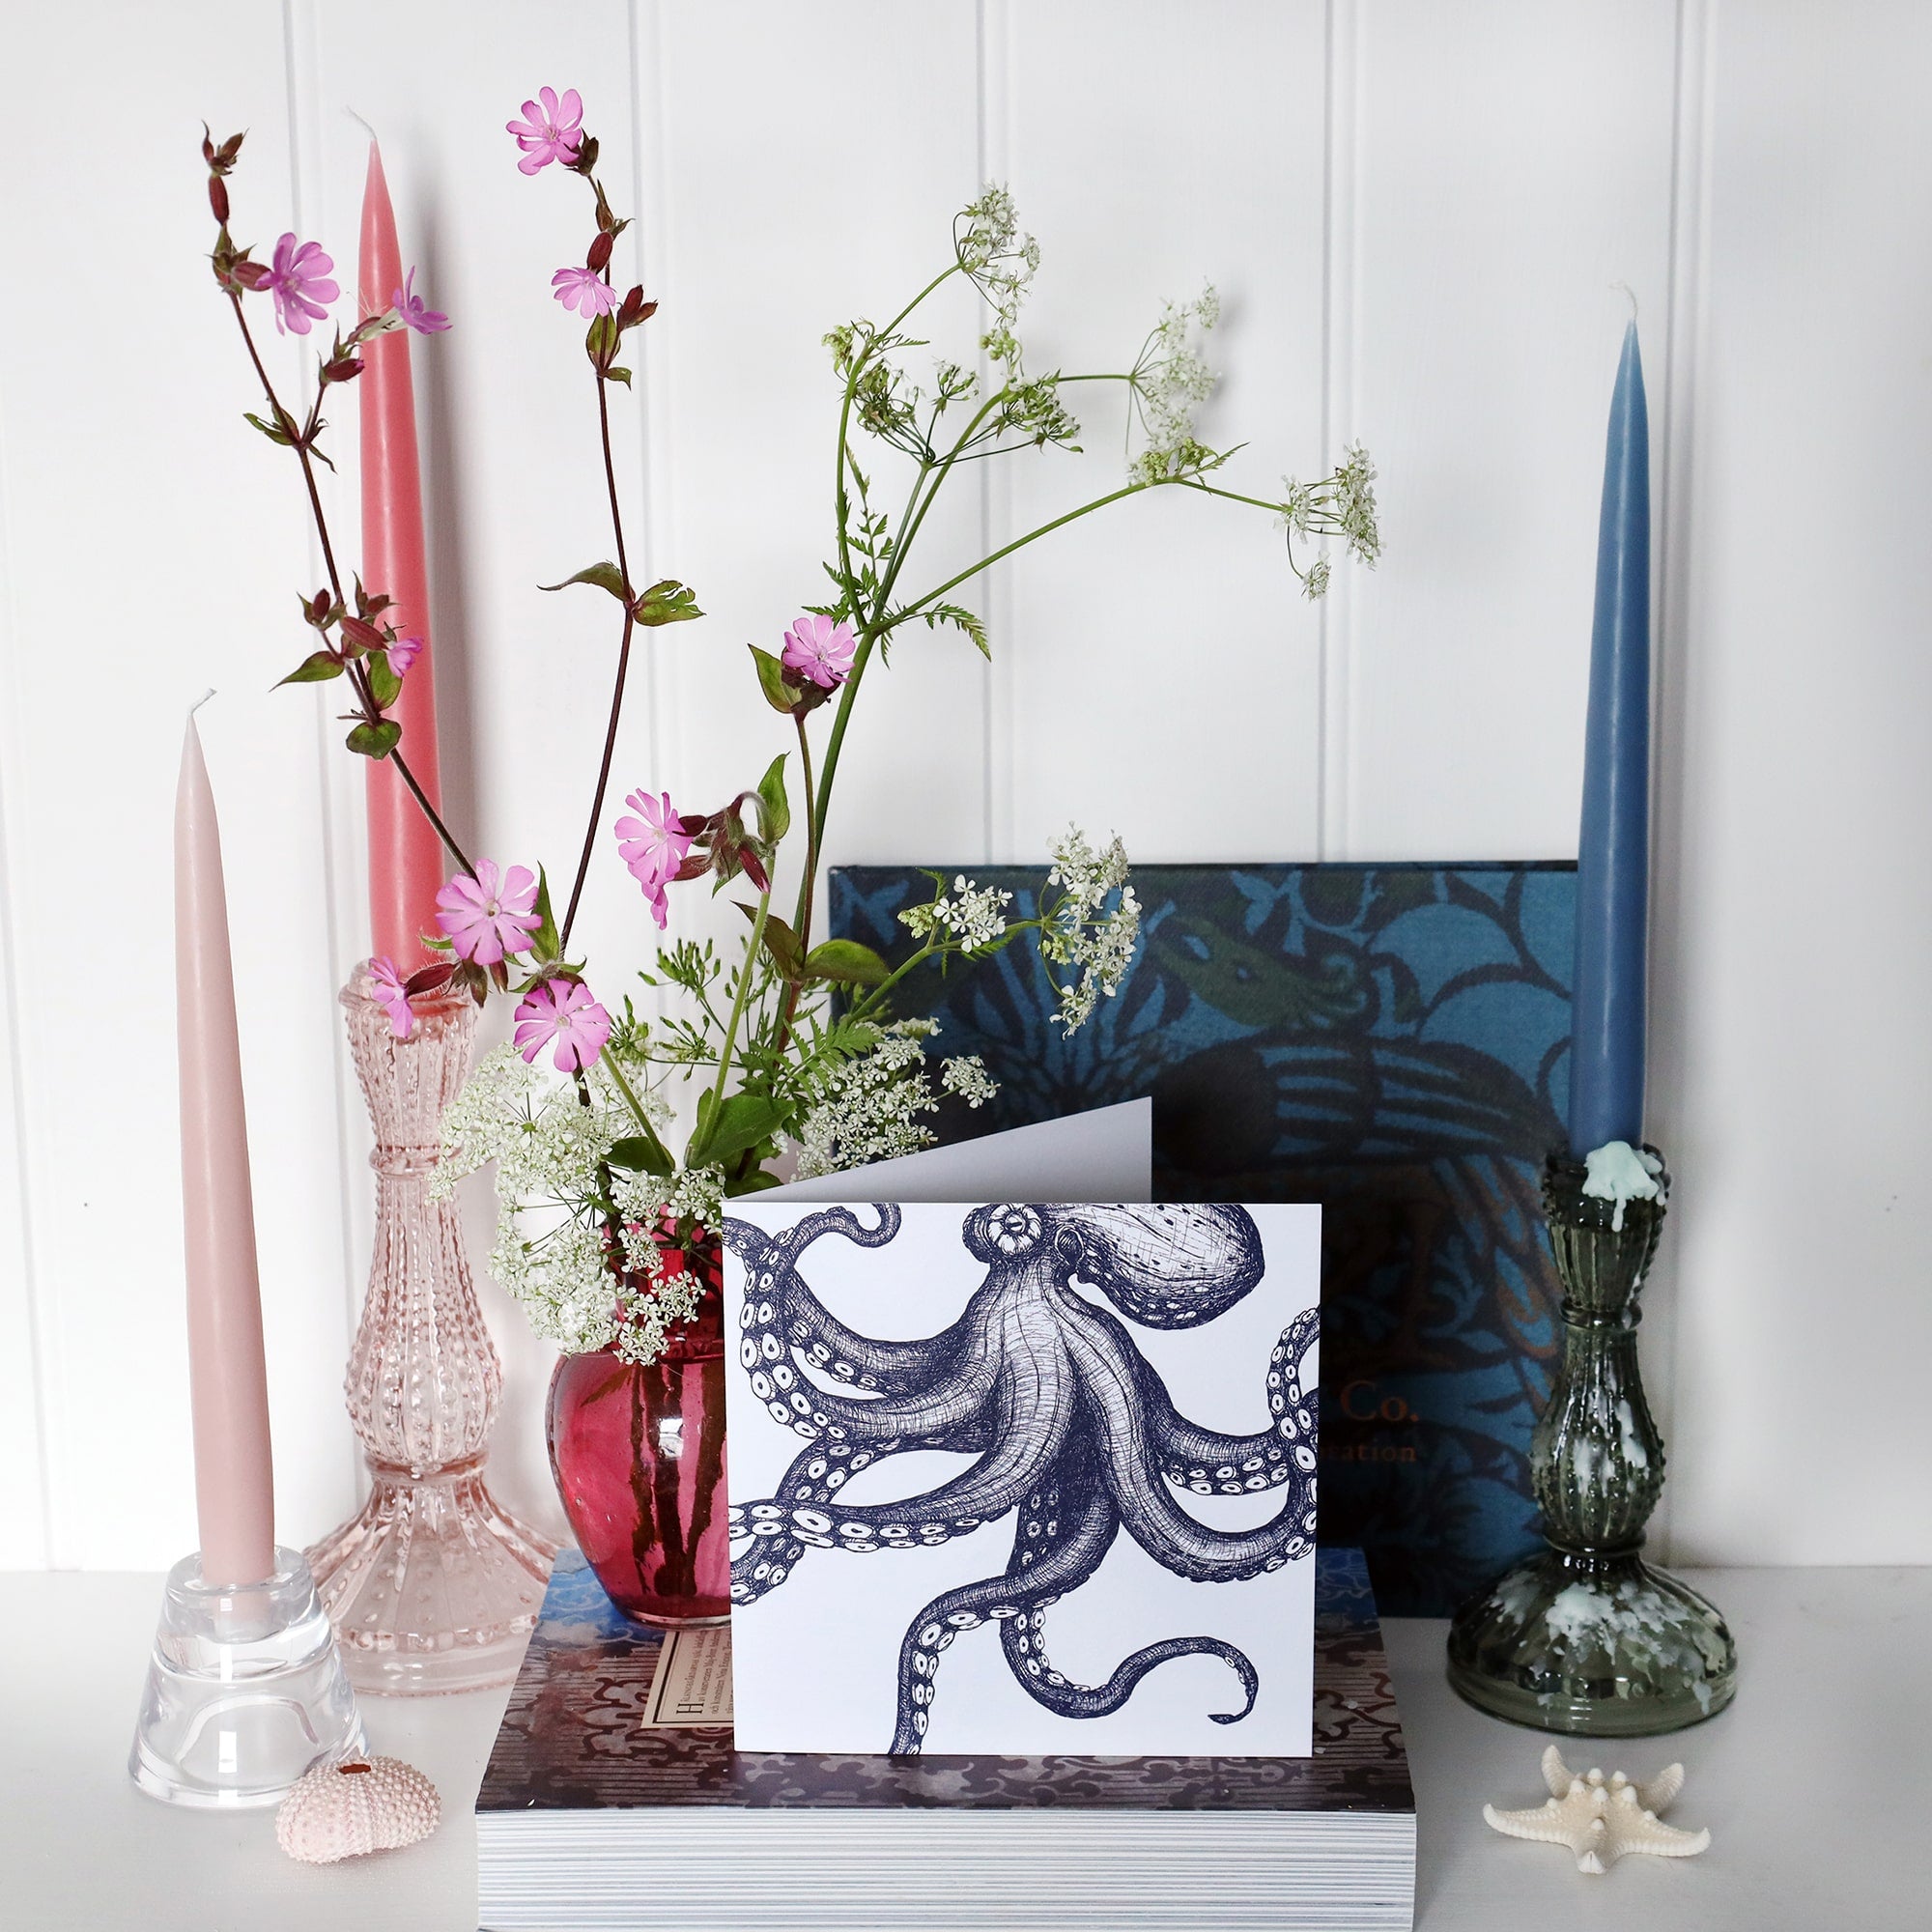 greeting card with navy blue illustrated octopus that looks like it is dancing across the card on shelf with pink and blue candles in candlesticks and a small cranberry glass jug with wild flowers in